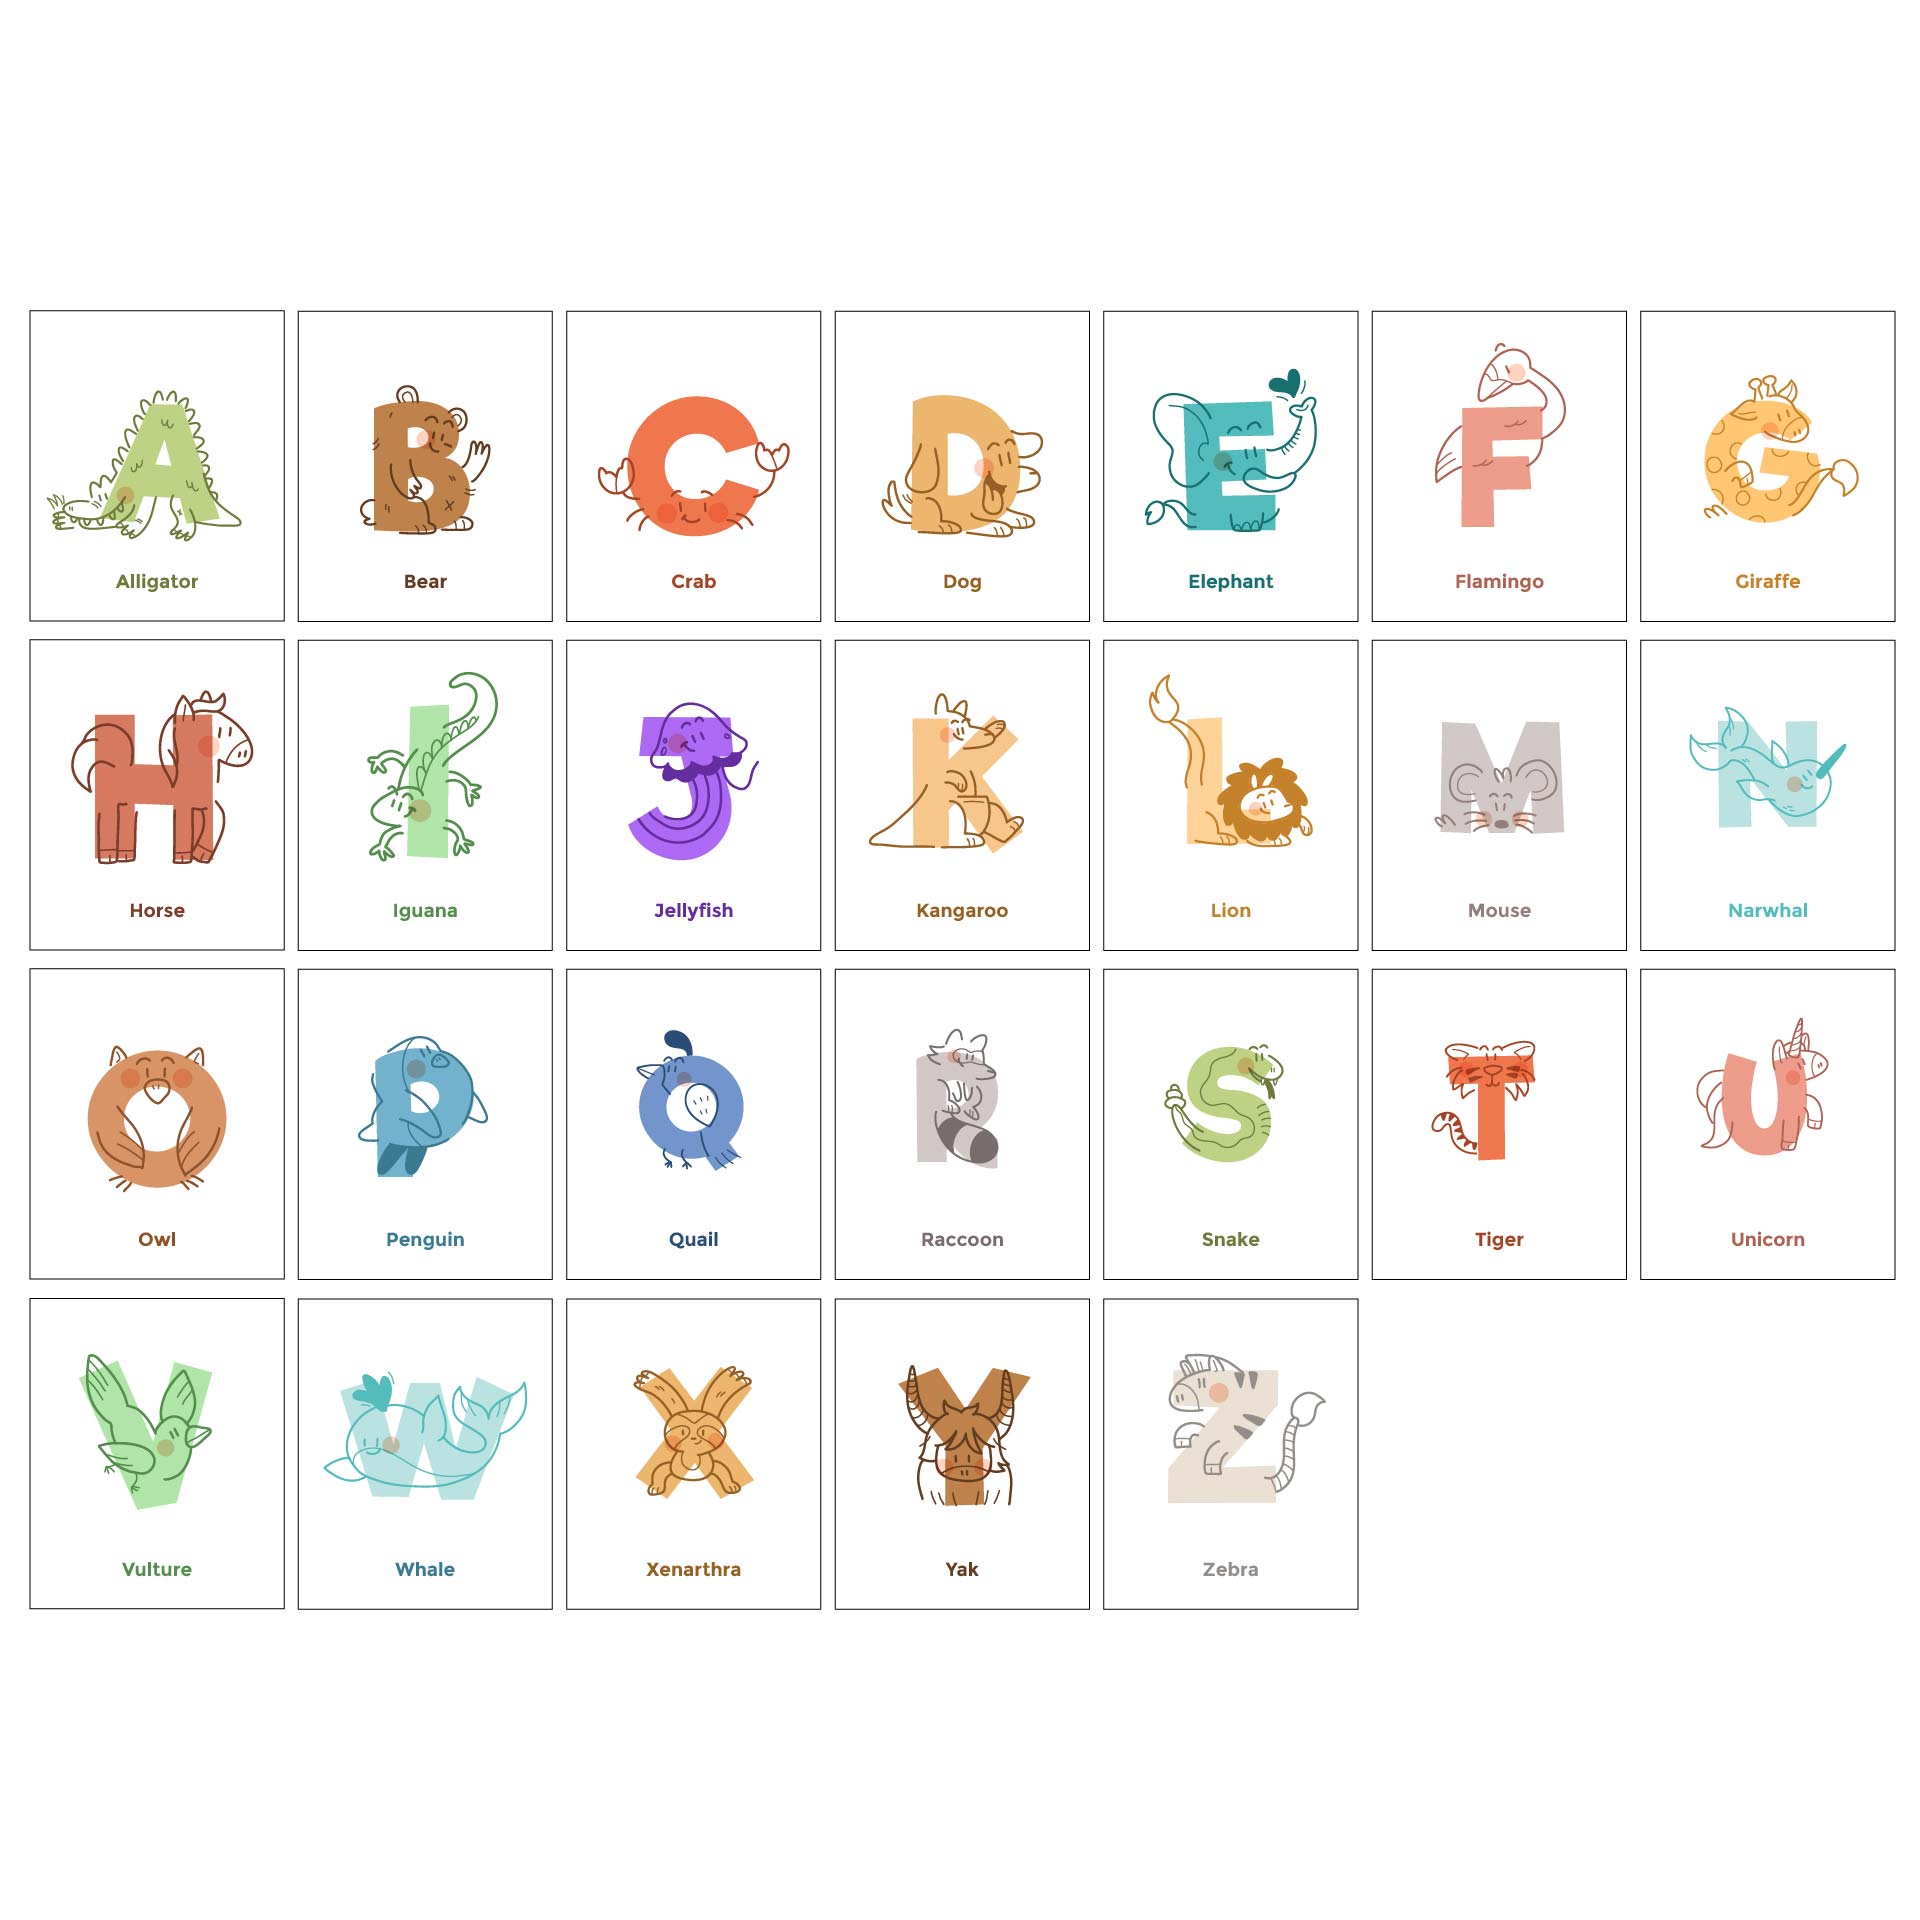 7-best-images-of-free-printable-alphabet-flashcards-free-printable